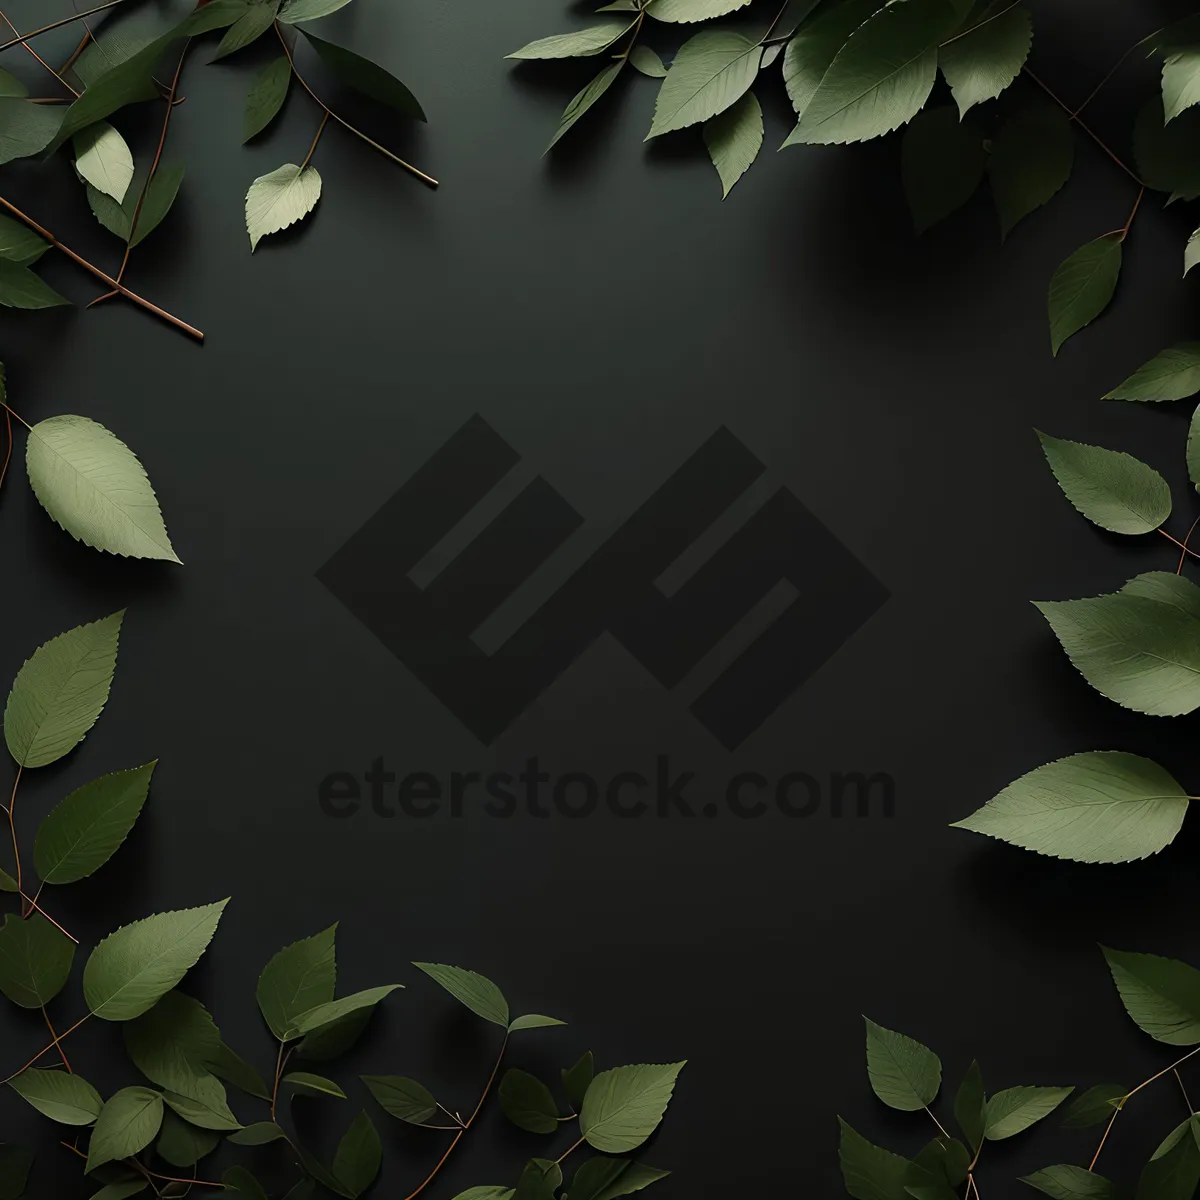 Picture of Summer Foliage: Vibrant Leafy Branch in a Natural Forest